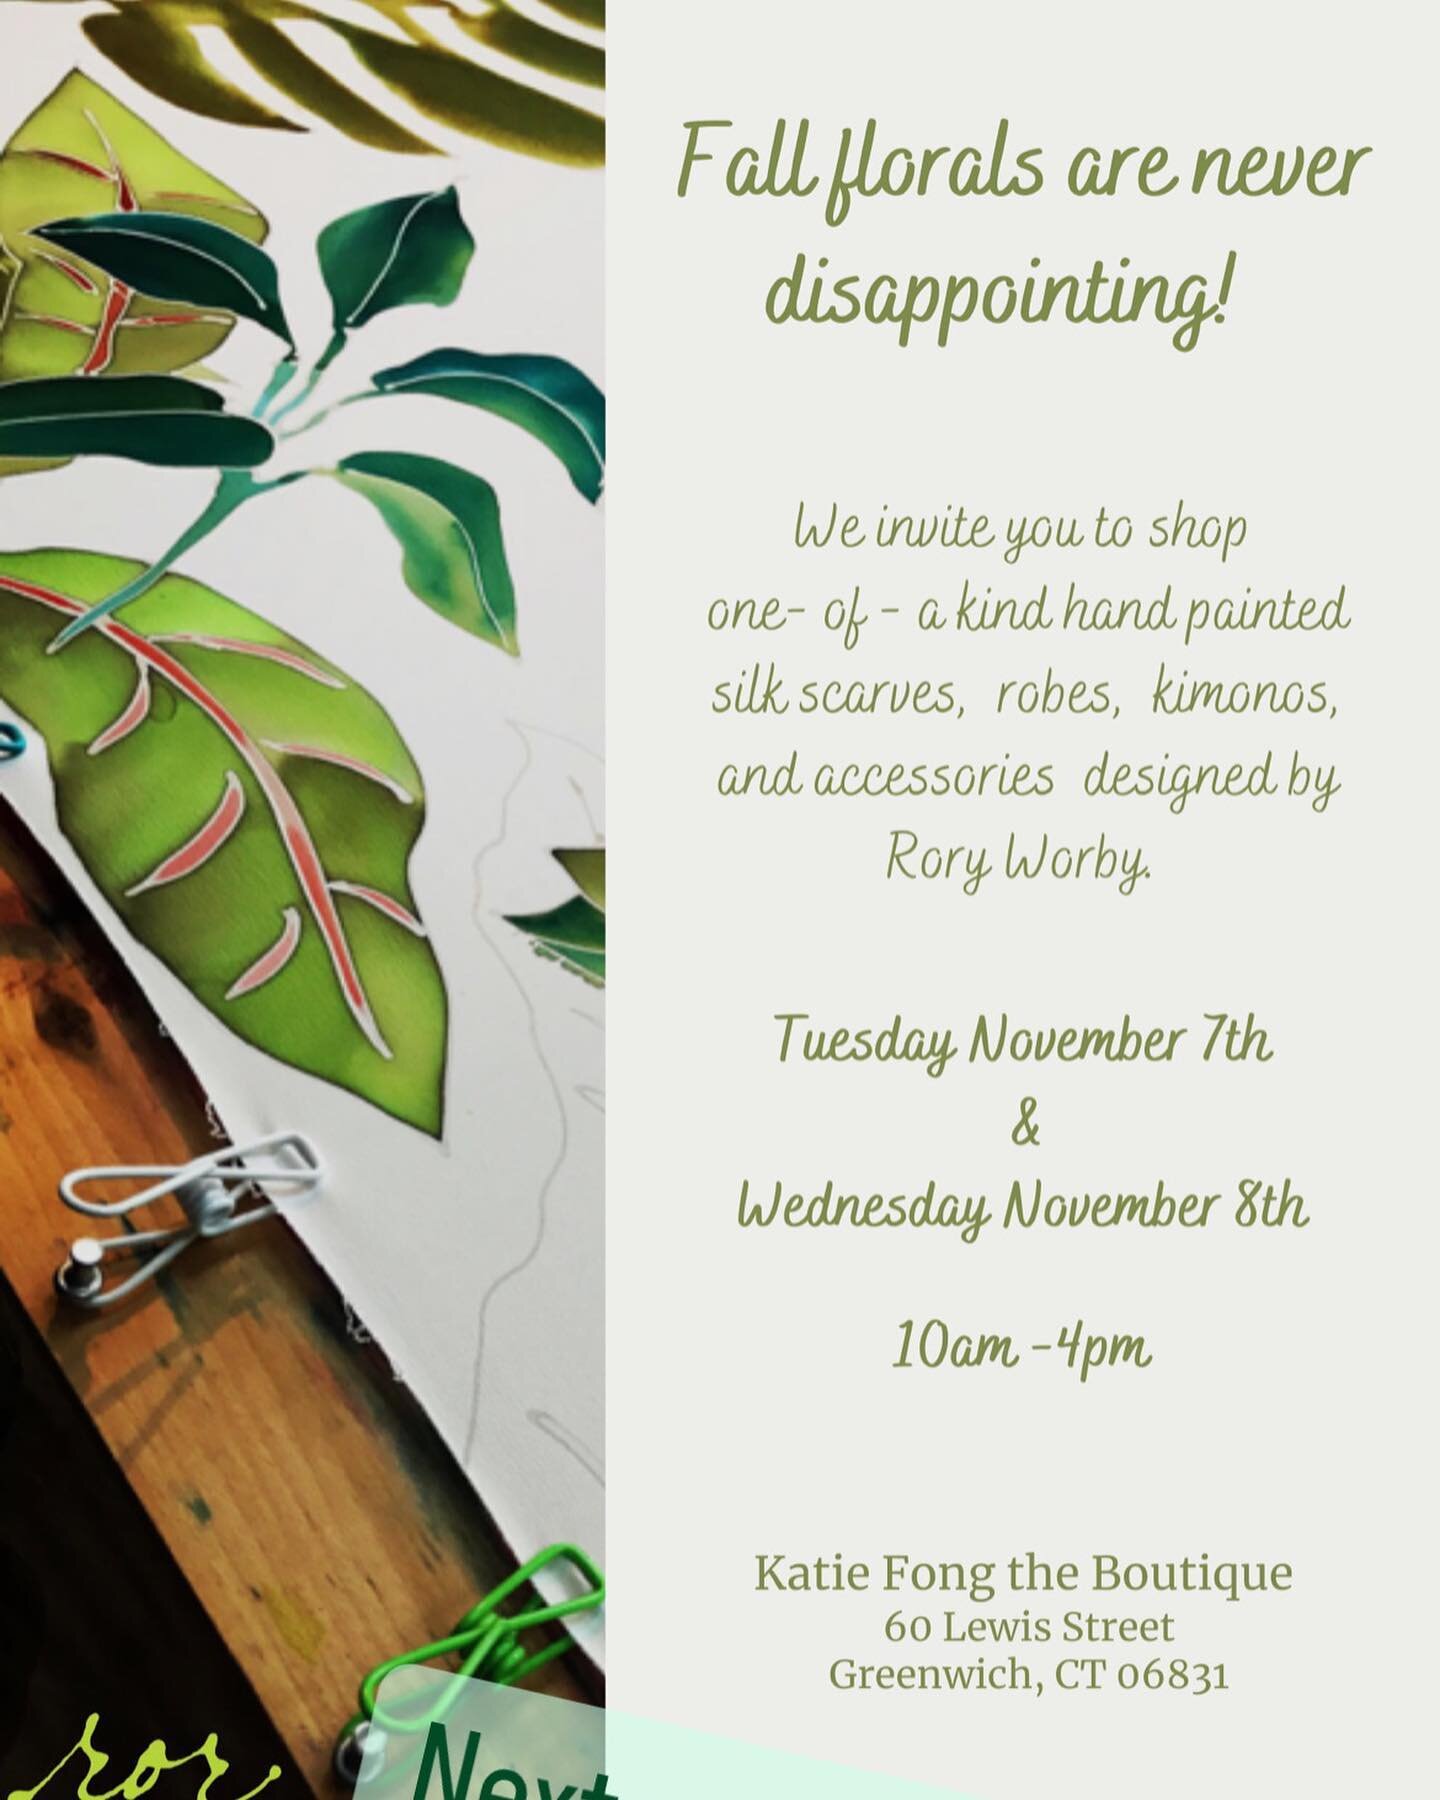 Kick off your Holiday shopping with me tomorrow and Wednesday @katiefongcollection in Greenwich!
Lots of new one-of-a-kind hand painted silk pieces. I am also taking custom orders for that special 🎁

#holidayshopping #custom #custommade #oneofakind 